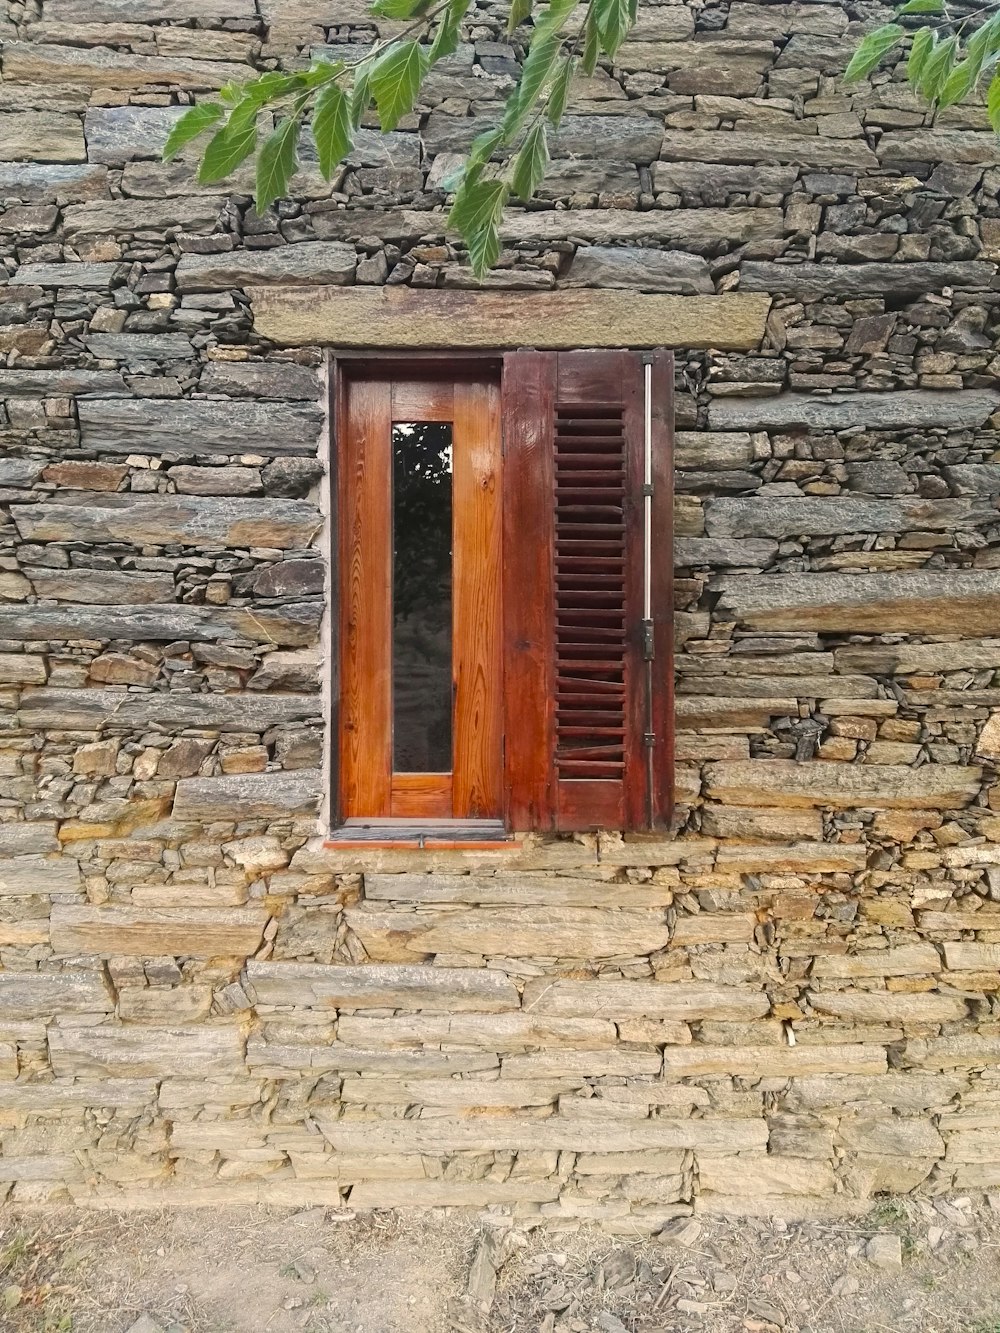 a window in a stone building